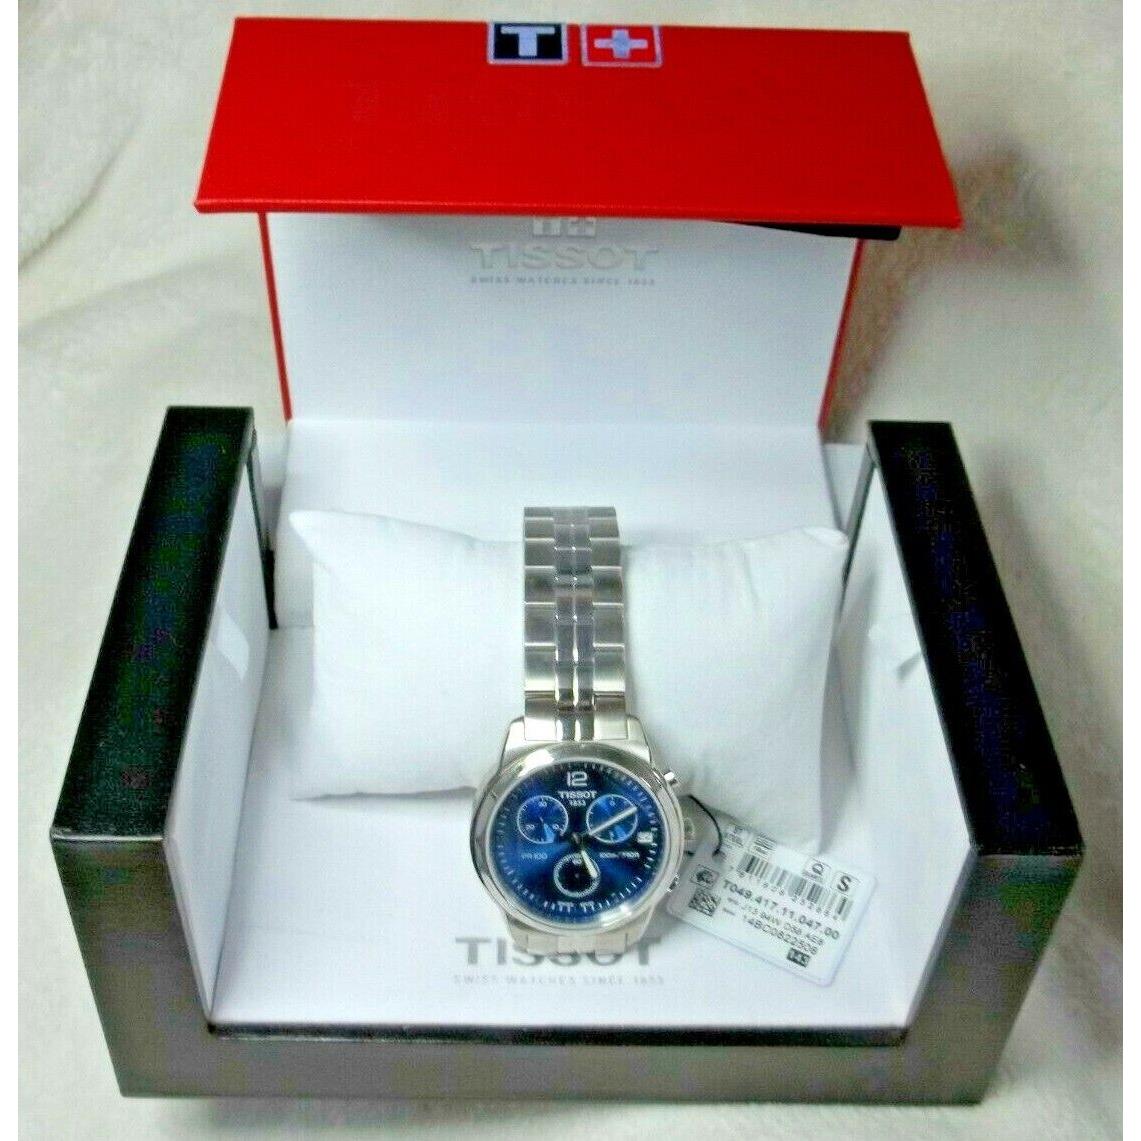 Tissot watch  - Blue Dial, Silver Band 0